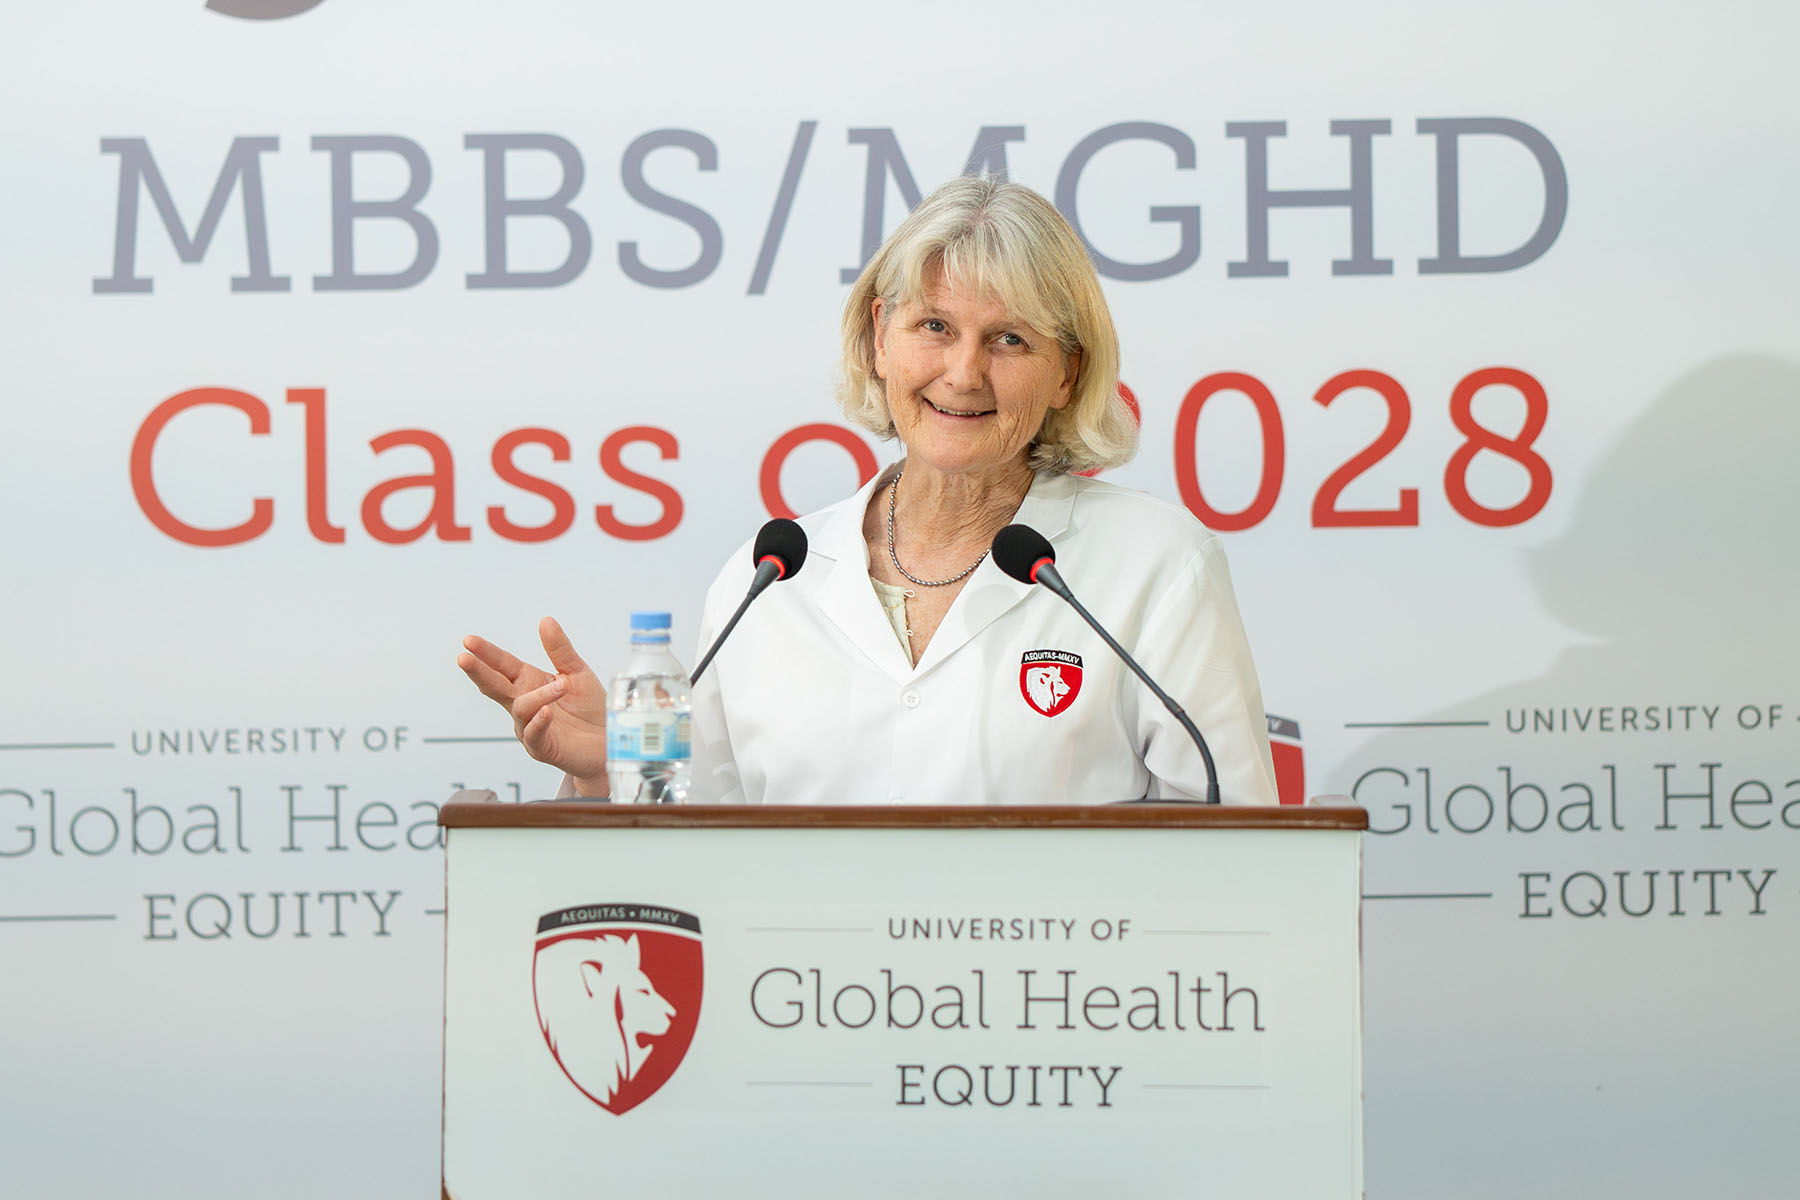 Pictured: Elizabeth Bradley. Person speaking at a podium with a white lab coat on. Behind the podium is a banner that reads, "MBBS/MGHD Class of 2028."